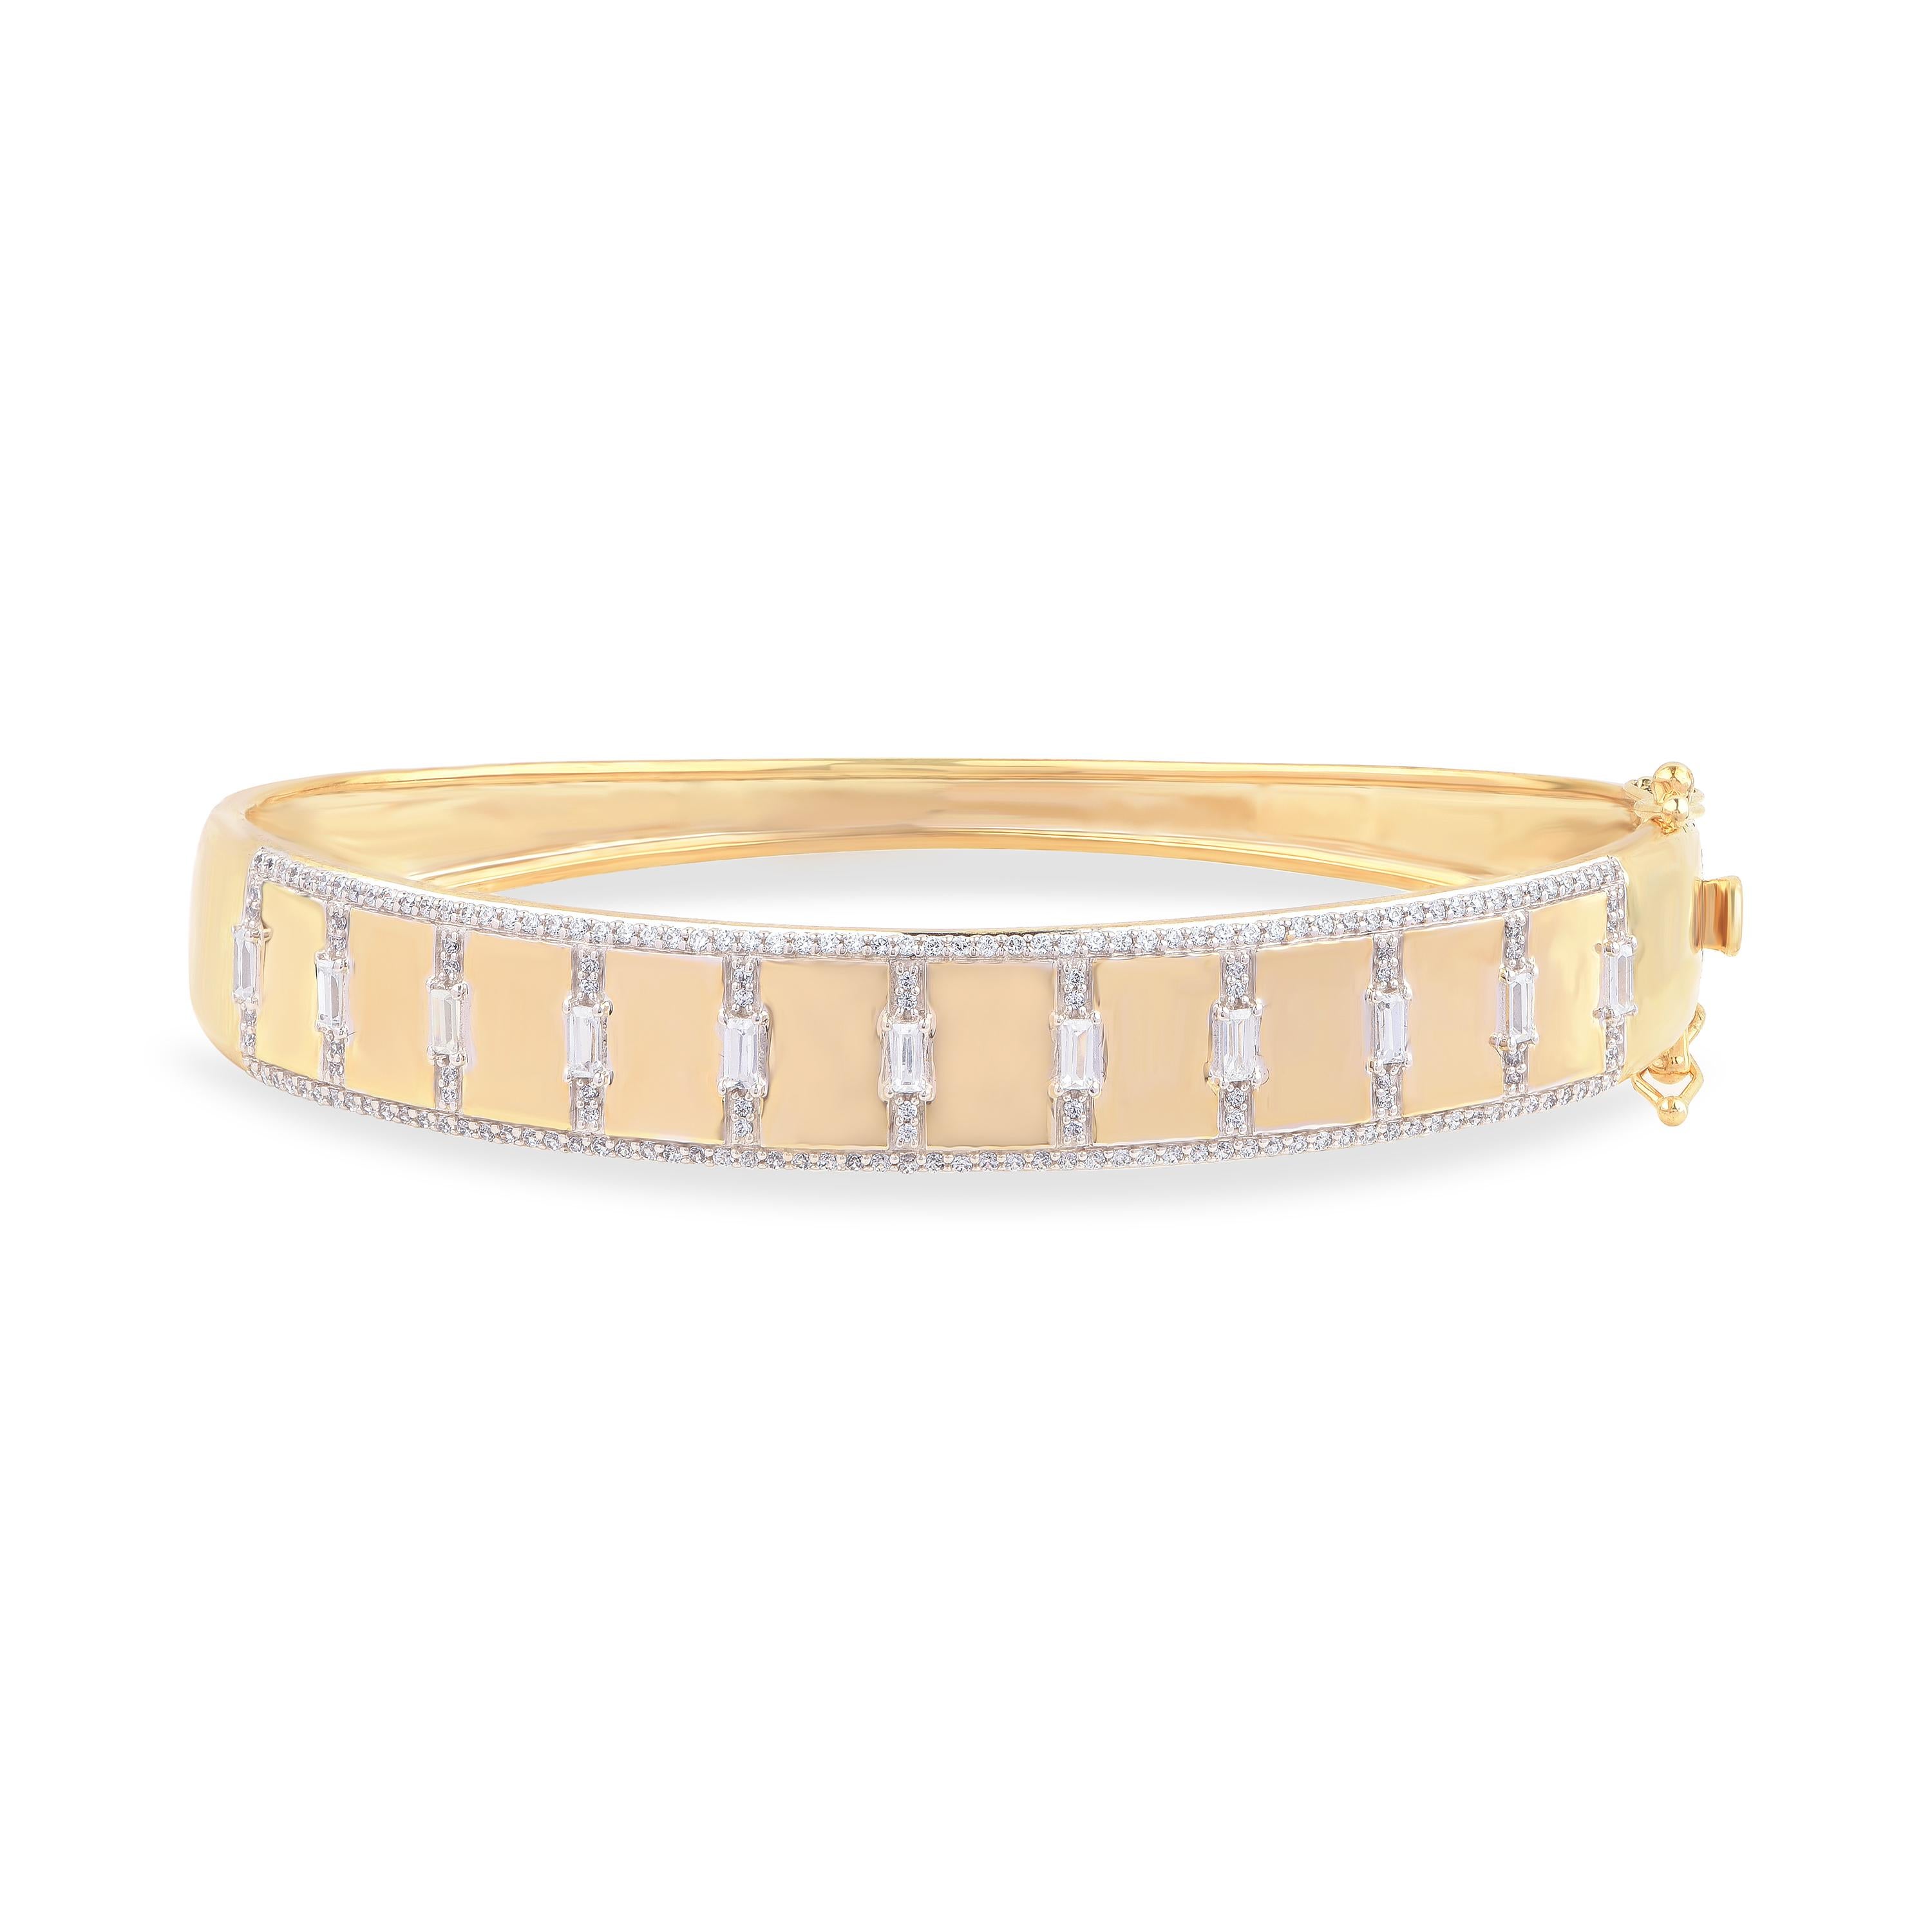 Exquisitely designed diamond bangle features 170 brilliant cut and 11 baguette shape diamonds accented in prong setting and fashioned in 18-karat yellow gold. The diamonds are graded H-I Color, I2 Clarity. 